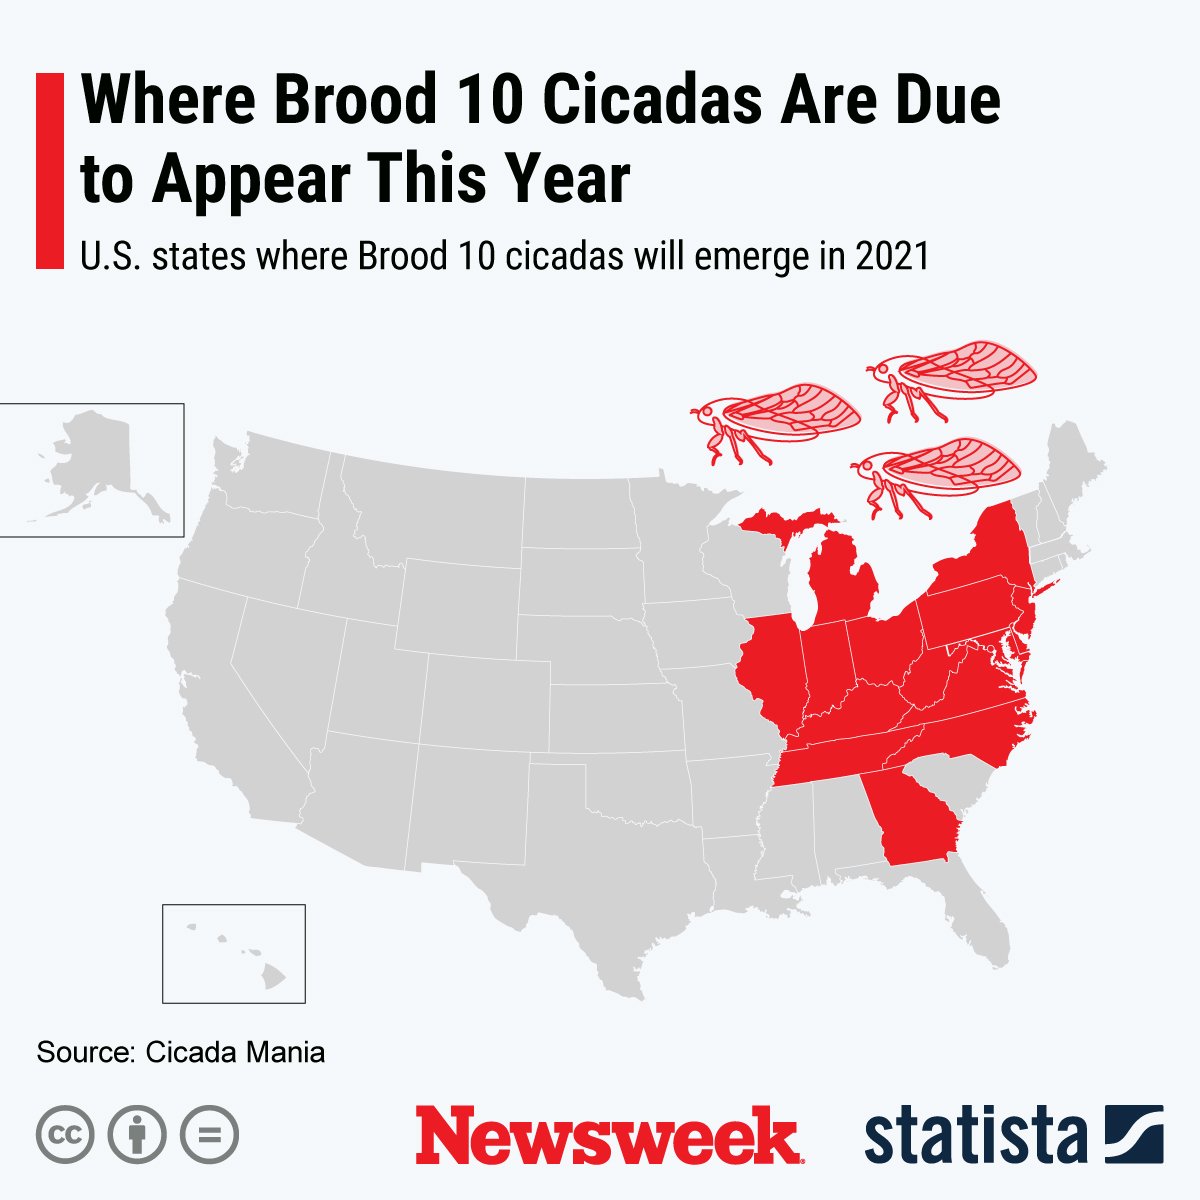 This Brood 10 Cicadas Map Shows the U.S. States Where the Insects Will